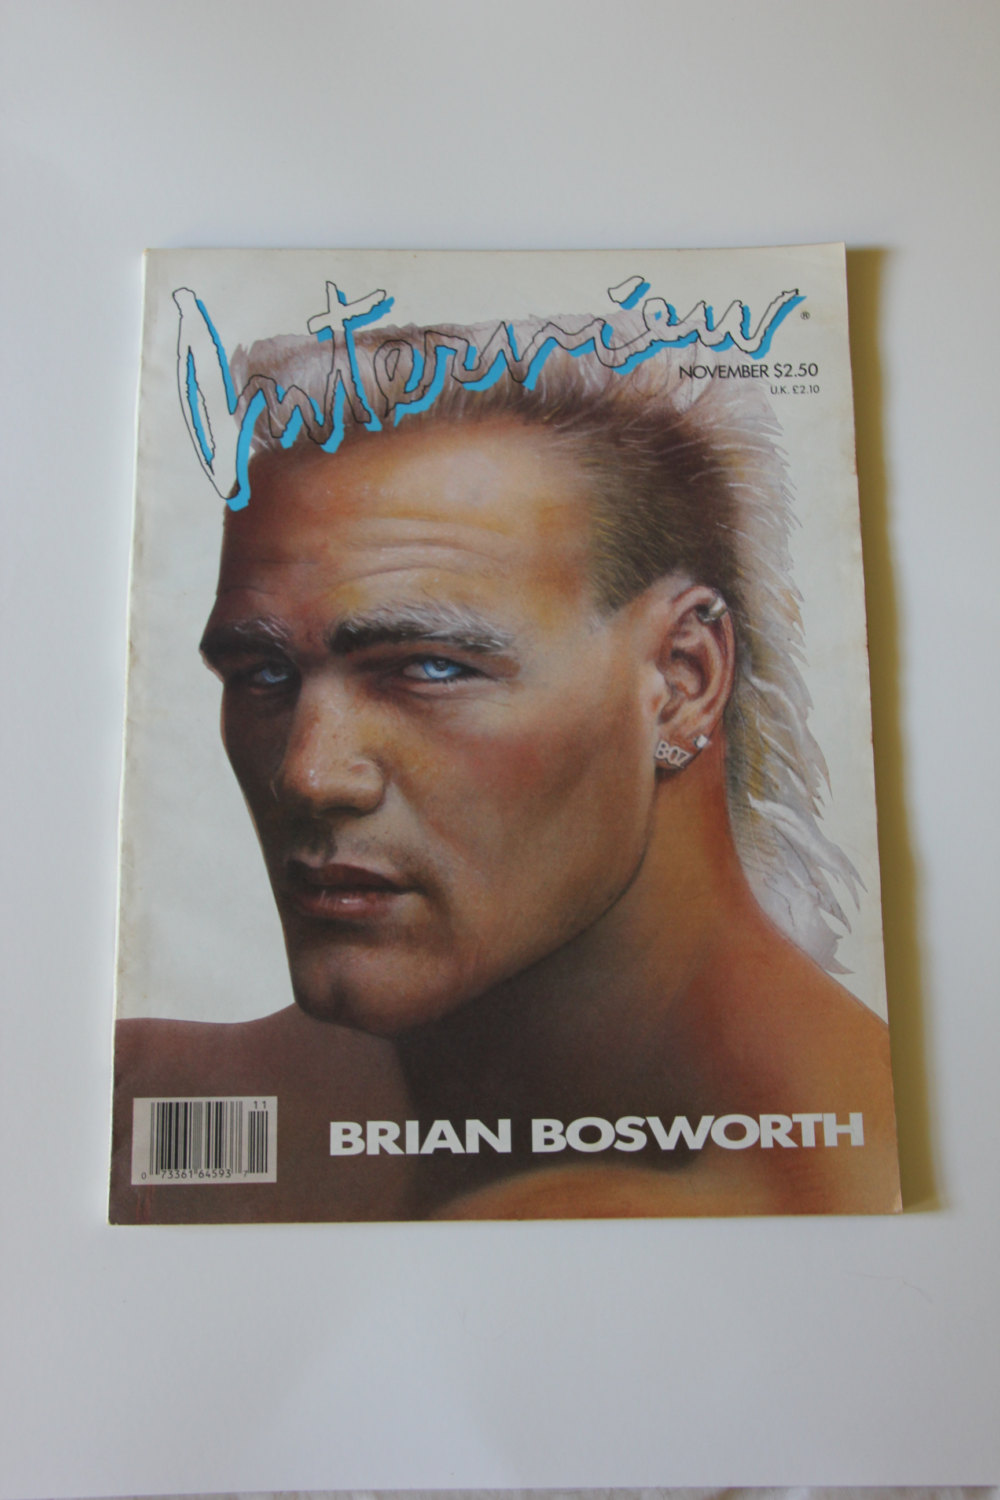 More Pictures Of Brian Bosworth. brian bosworth photos. 